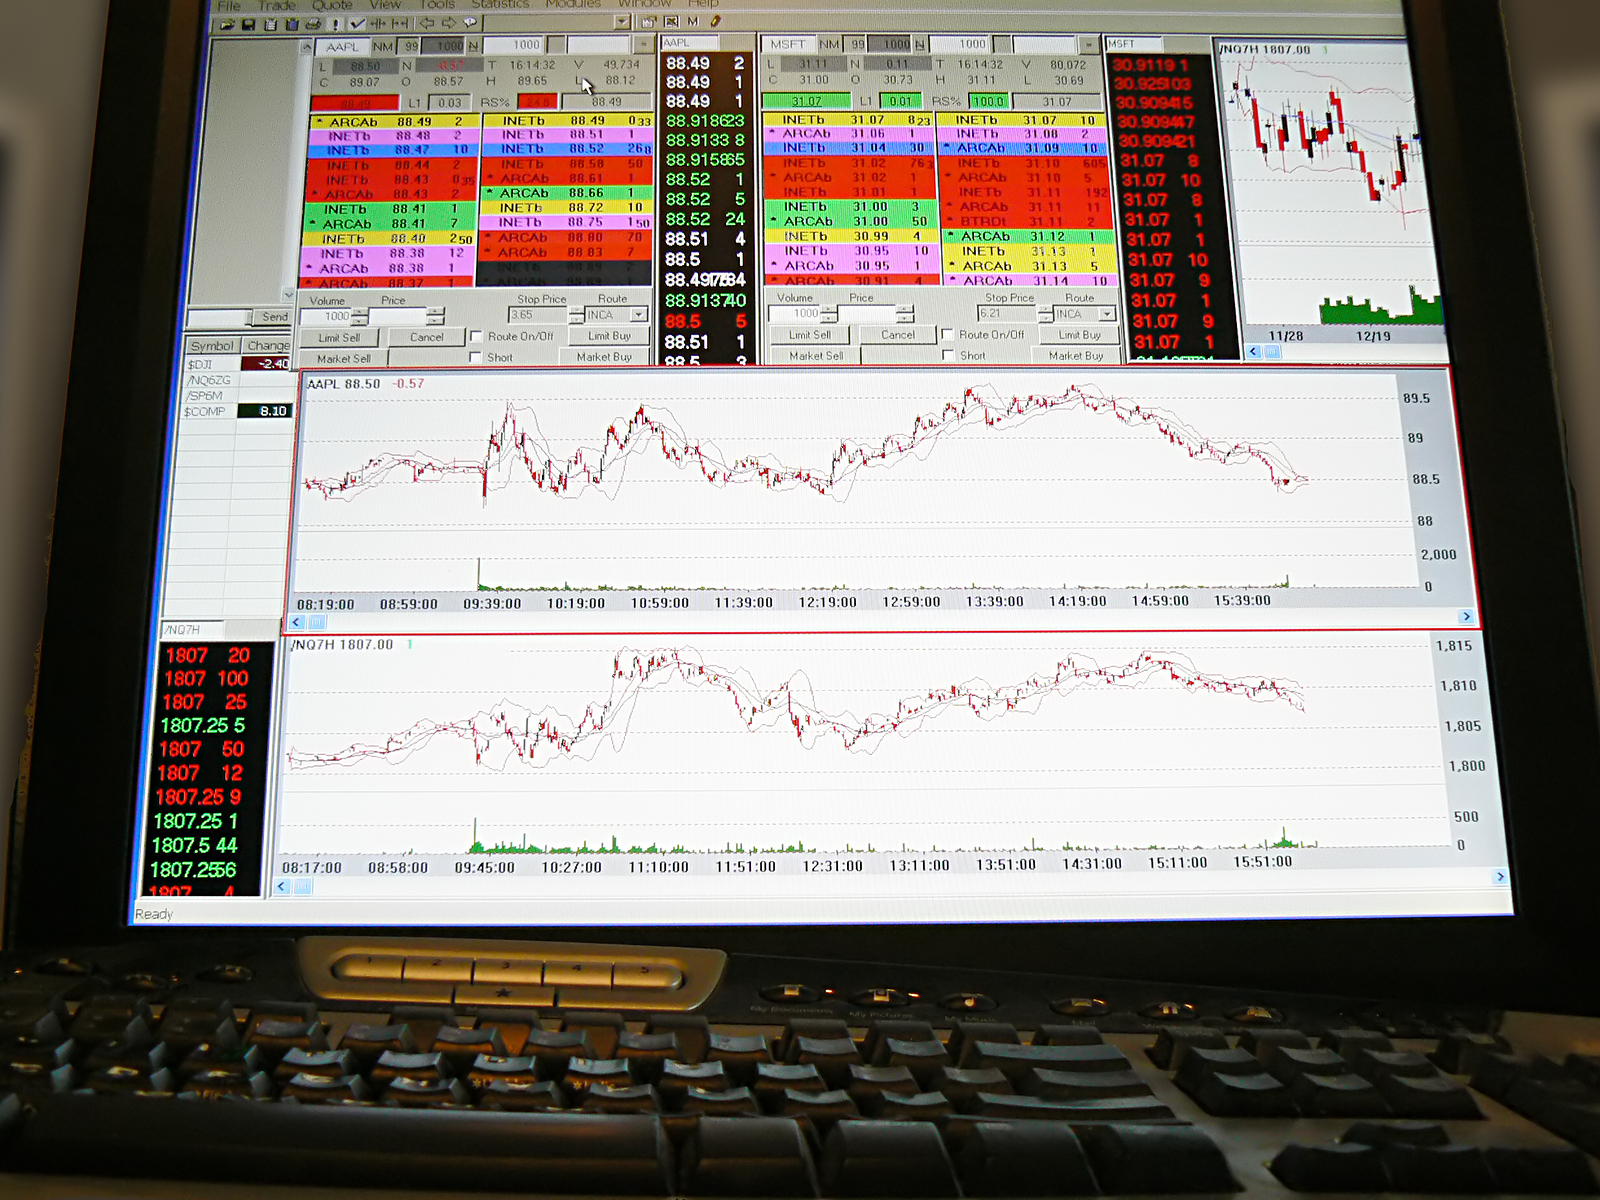 stock market charts and trading software on a computer screen with partial view of a keyboard